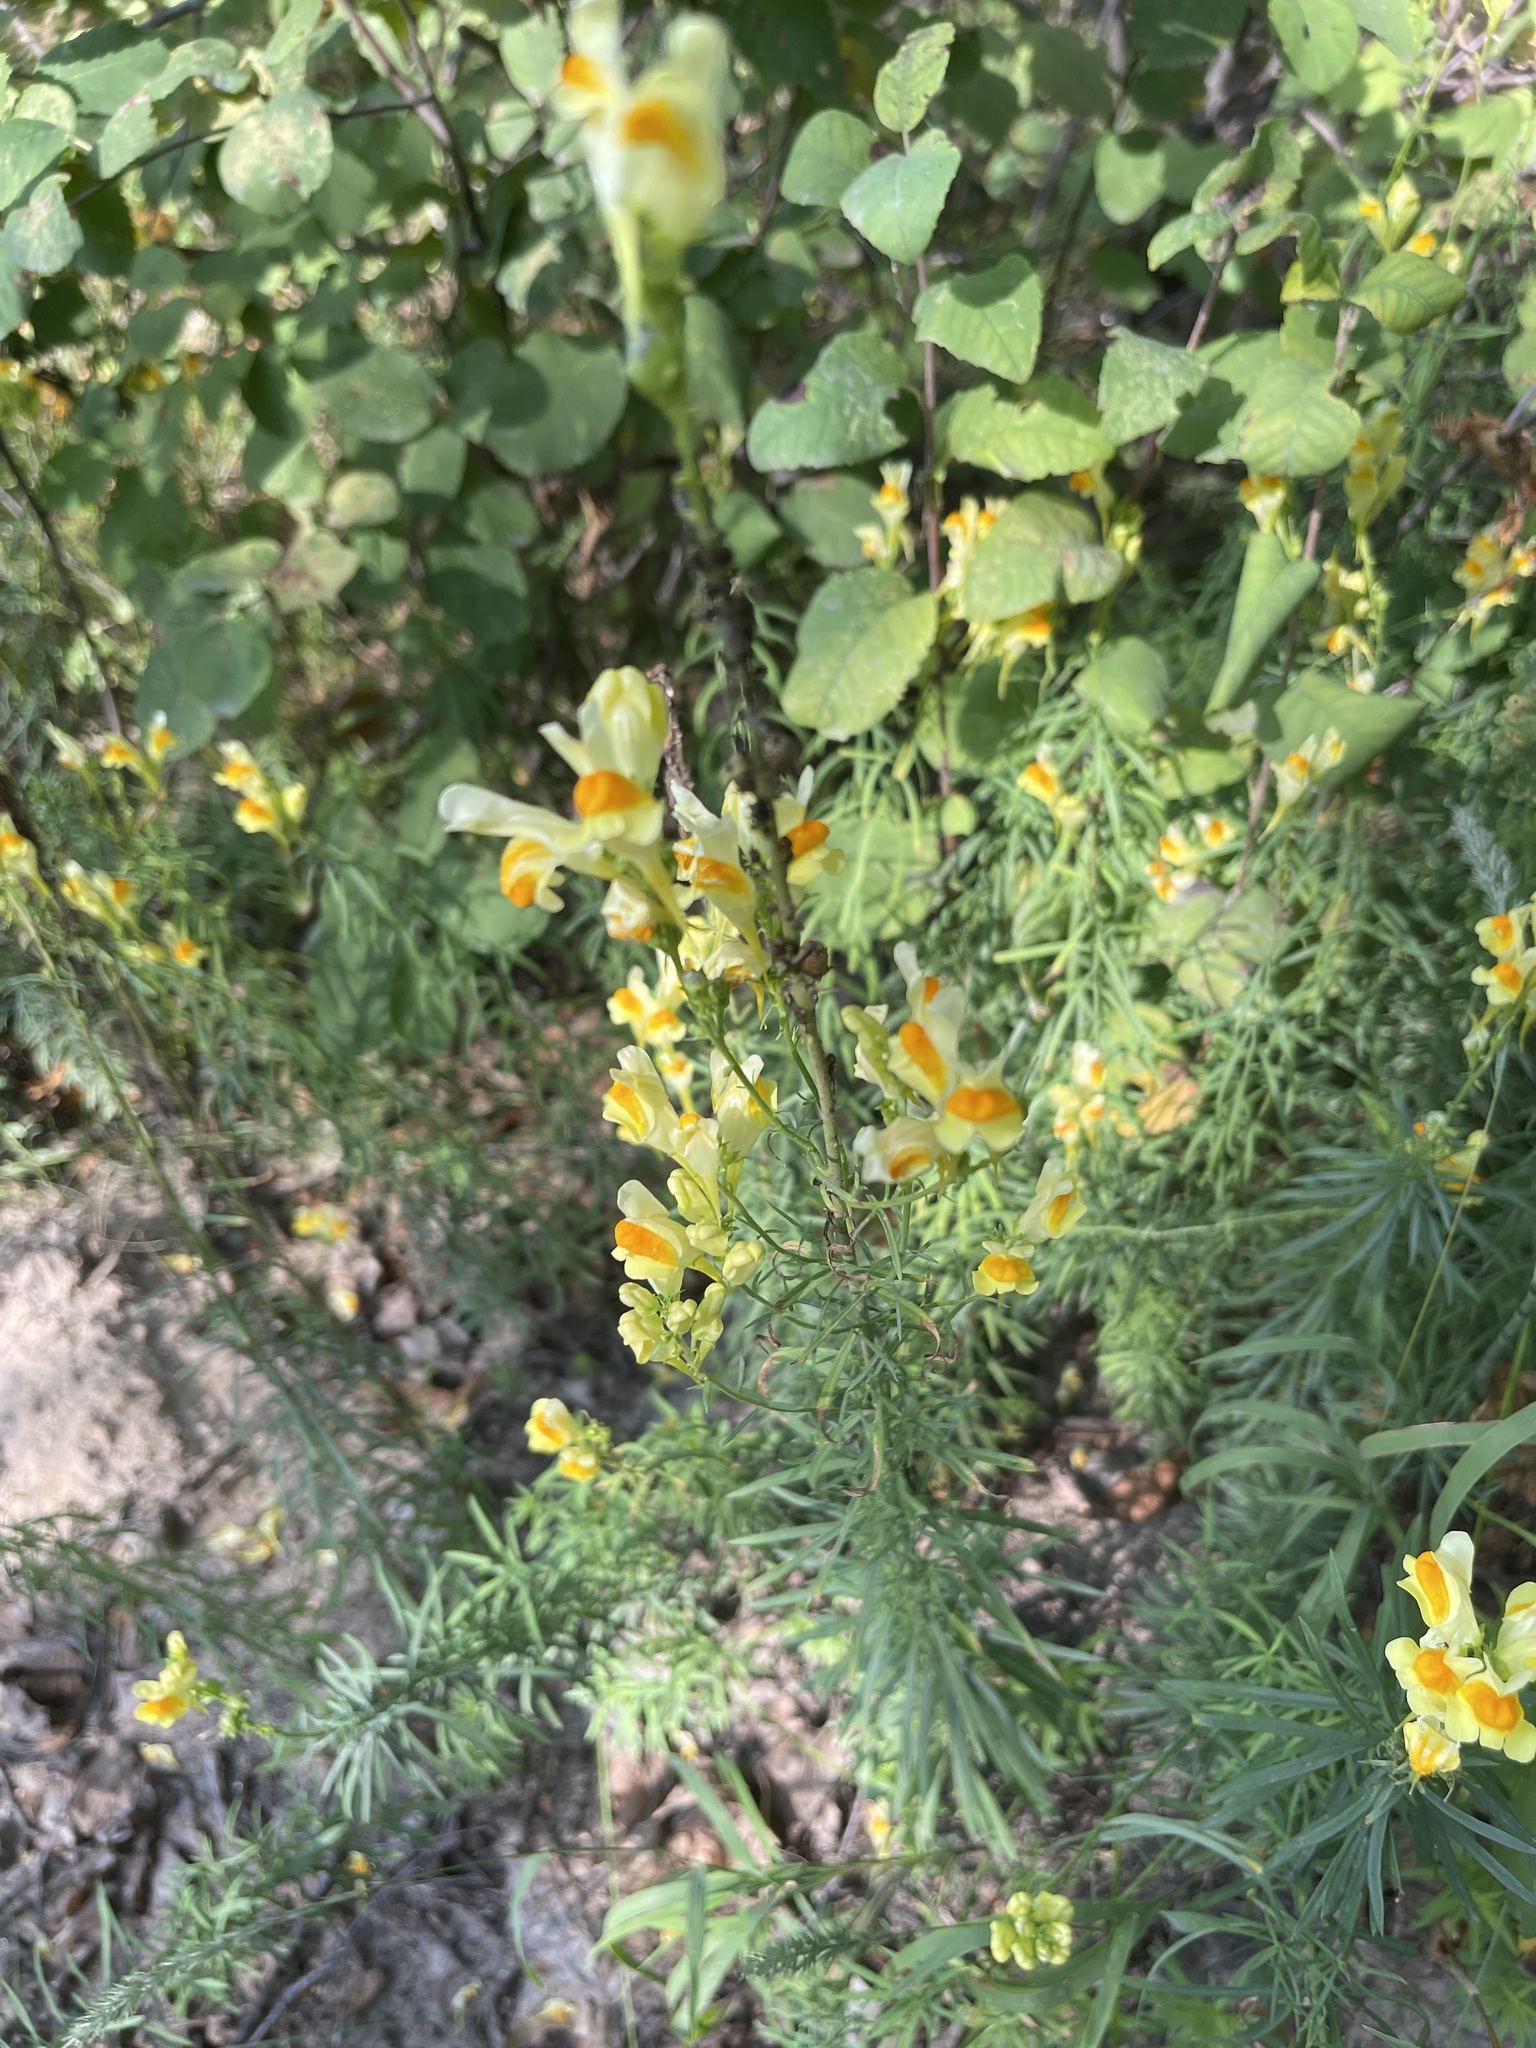 photo of Linaria vulgaris / butter and eggs in Victoria Beach Manitoba MB. Photo by chriskaye181 via iNaturalist CC BY-NC